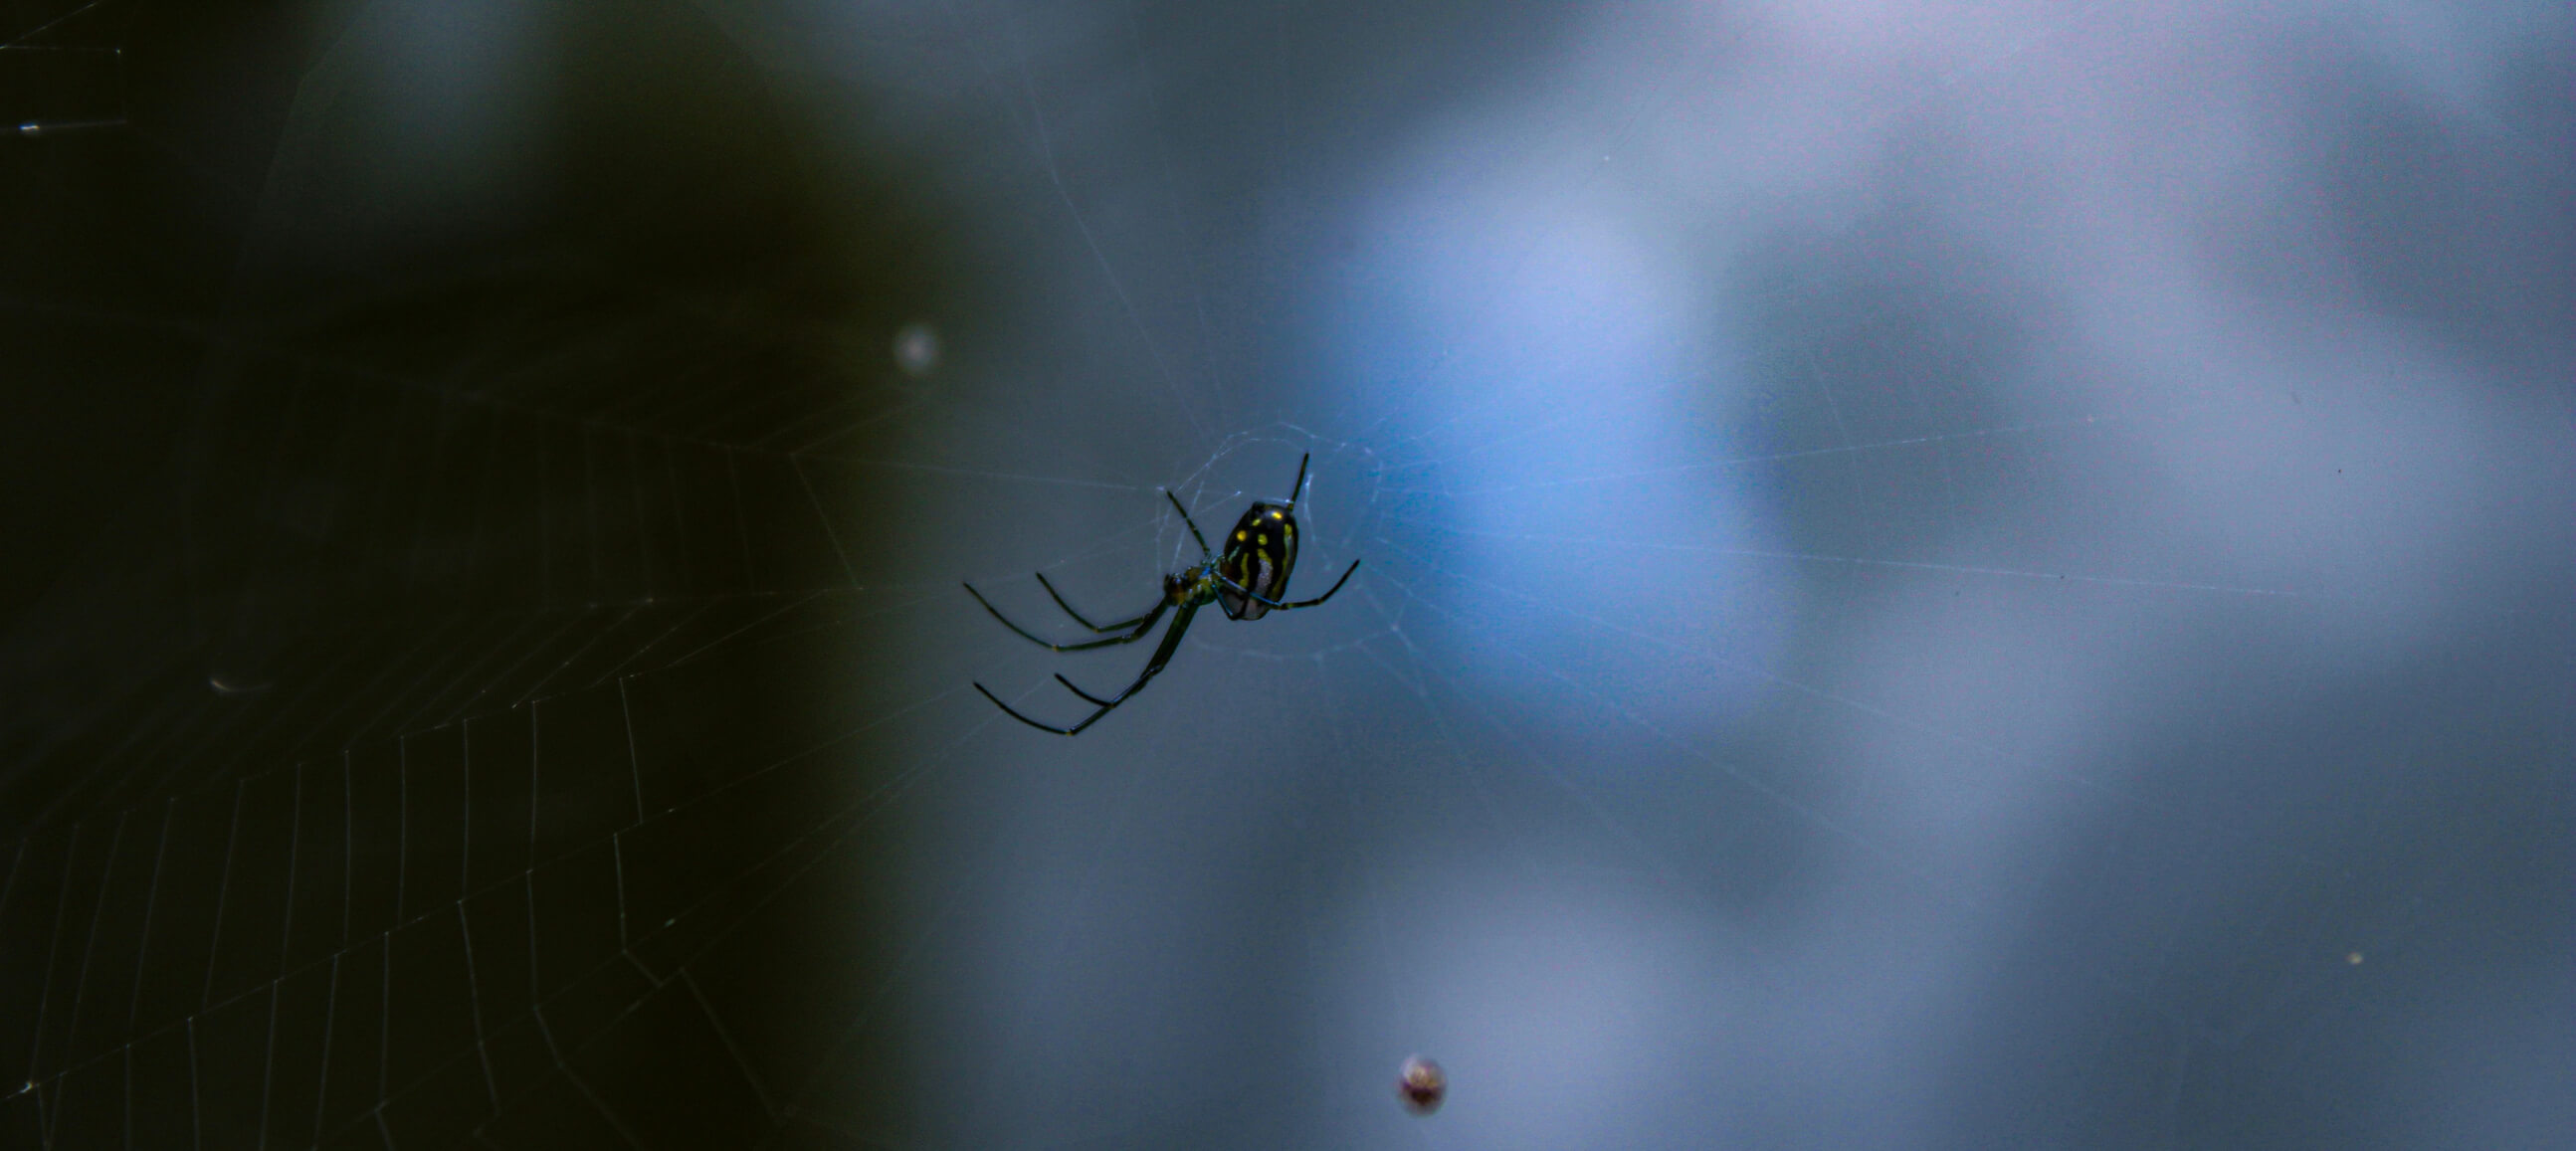 Spider Control in Southern California: Unmasking Halloween Horrors